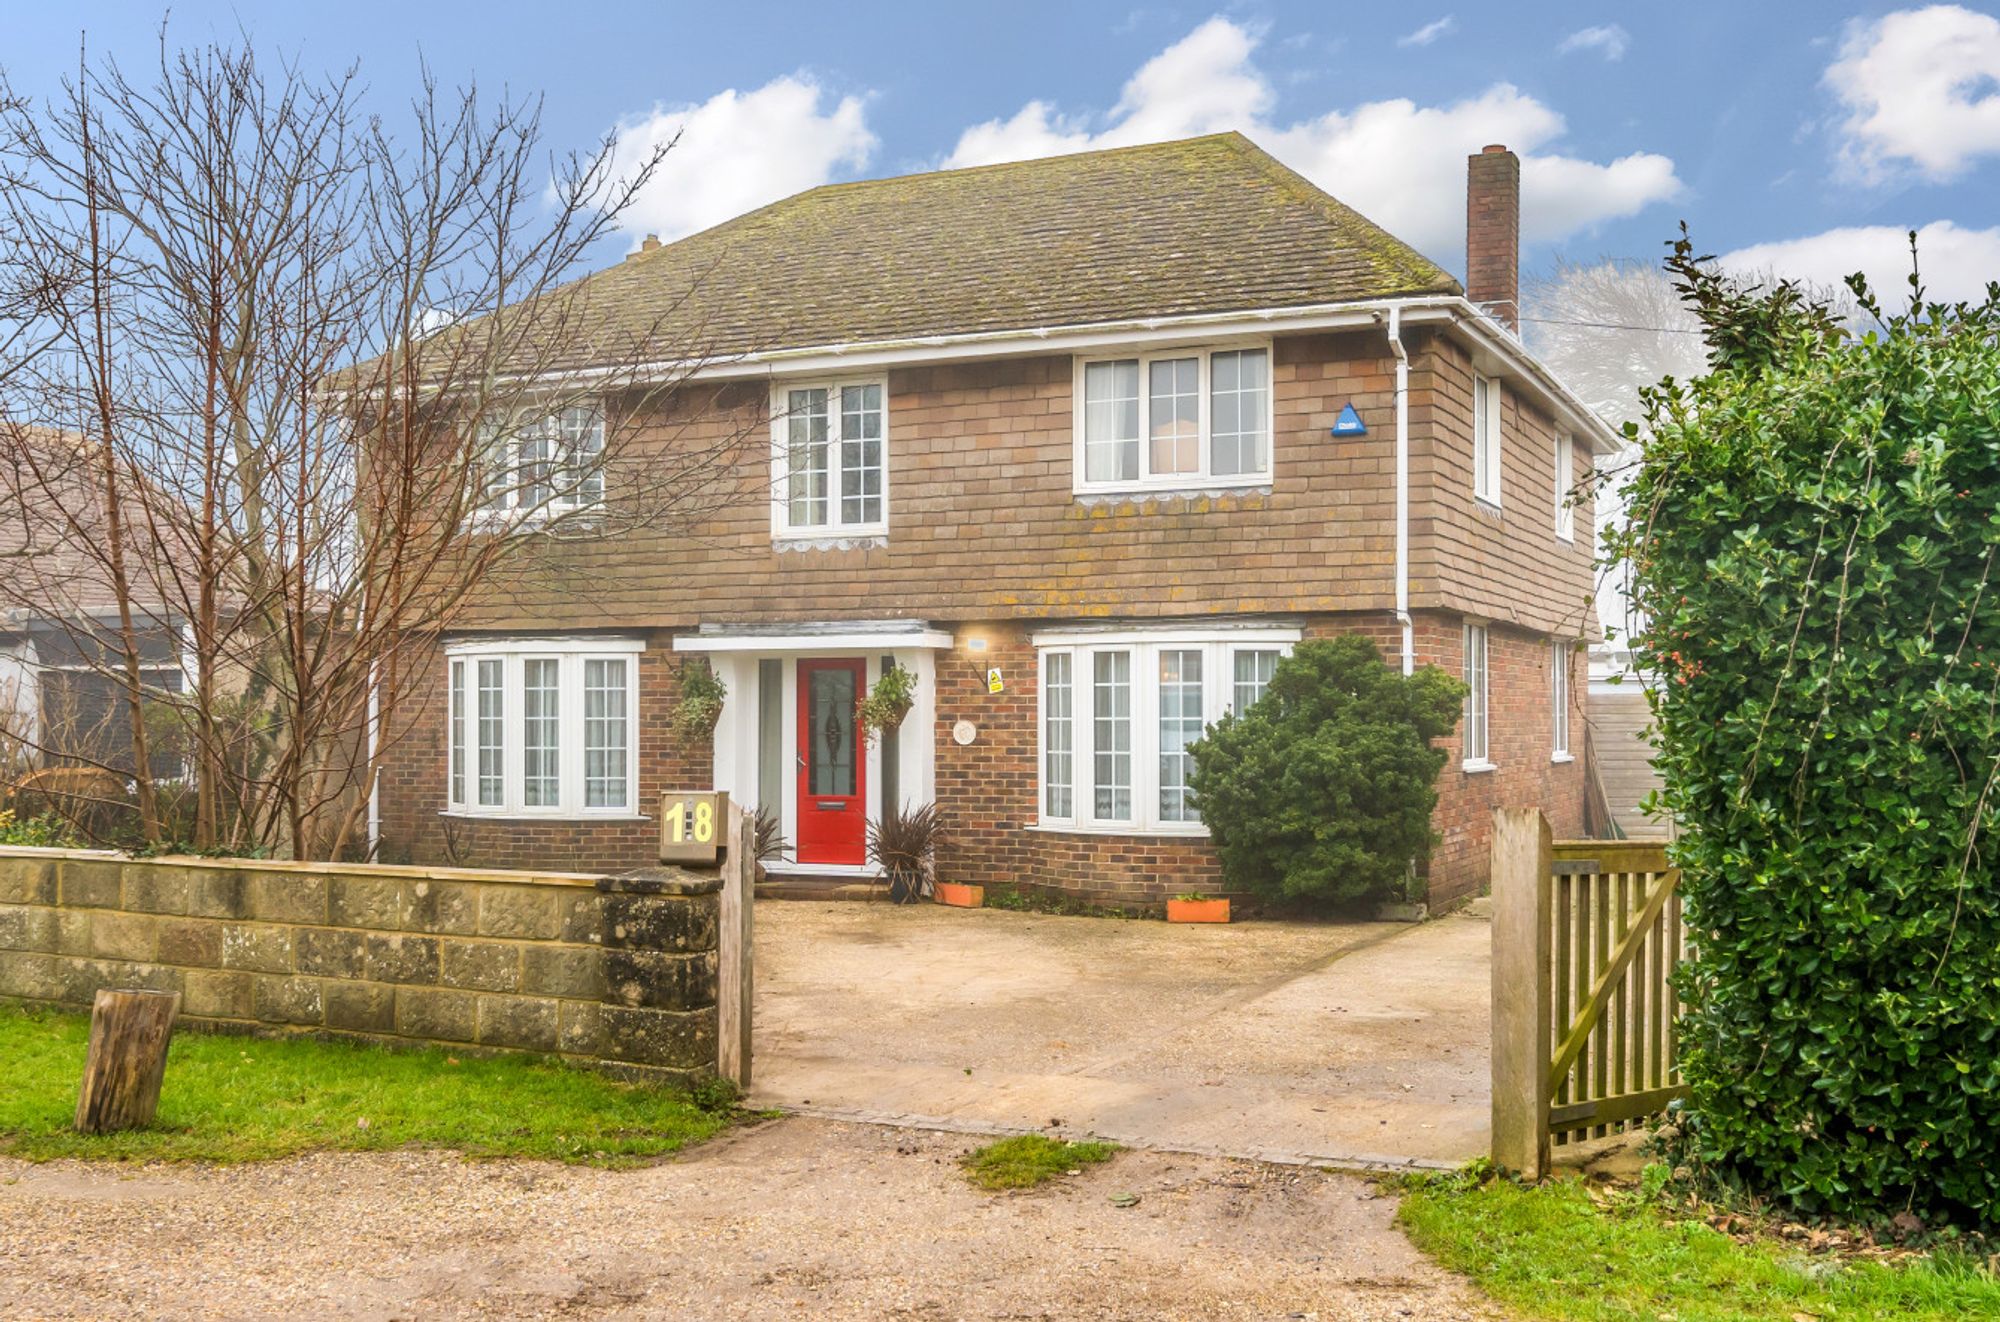 Meadows Road, East Wittering, PO20